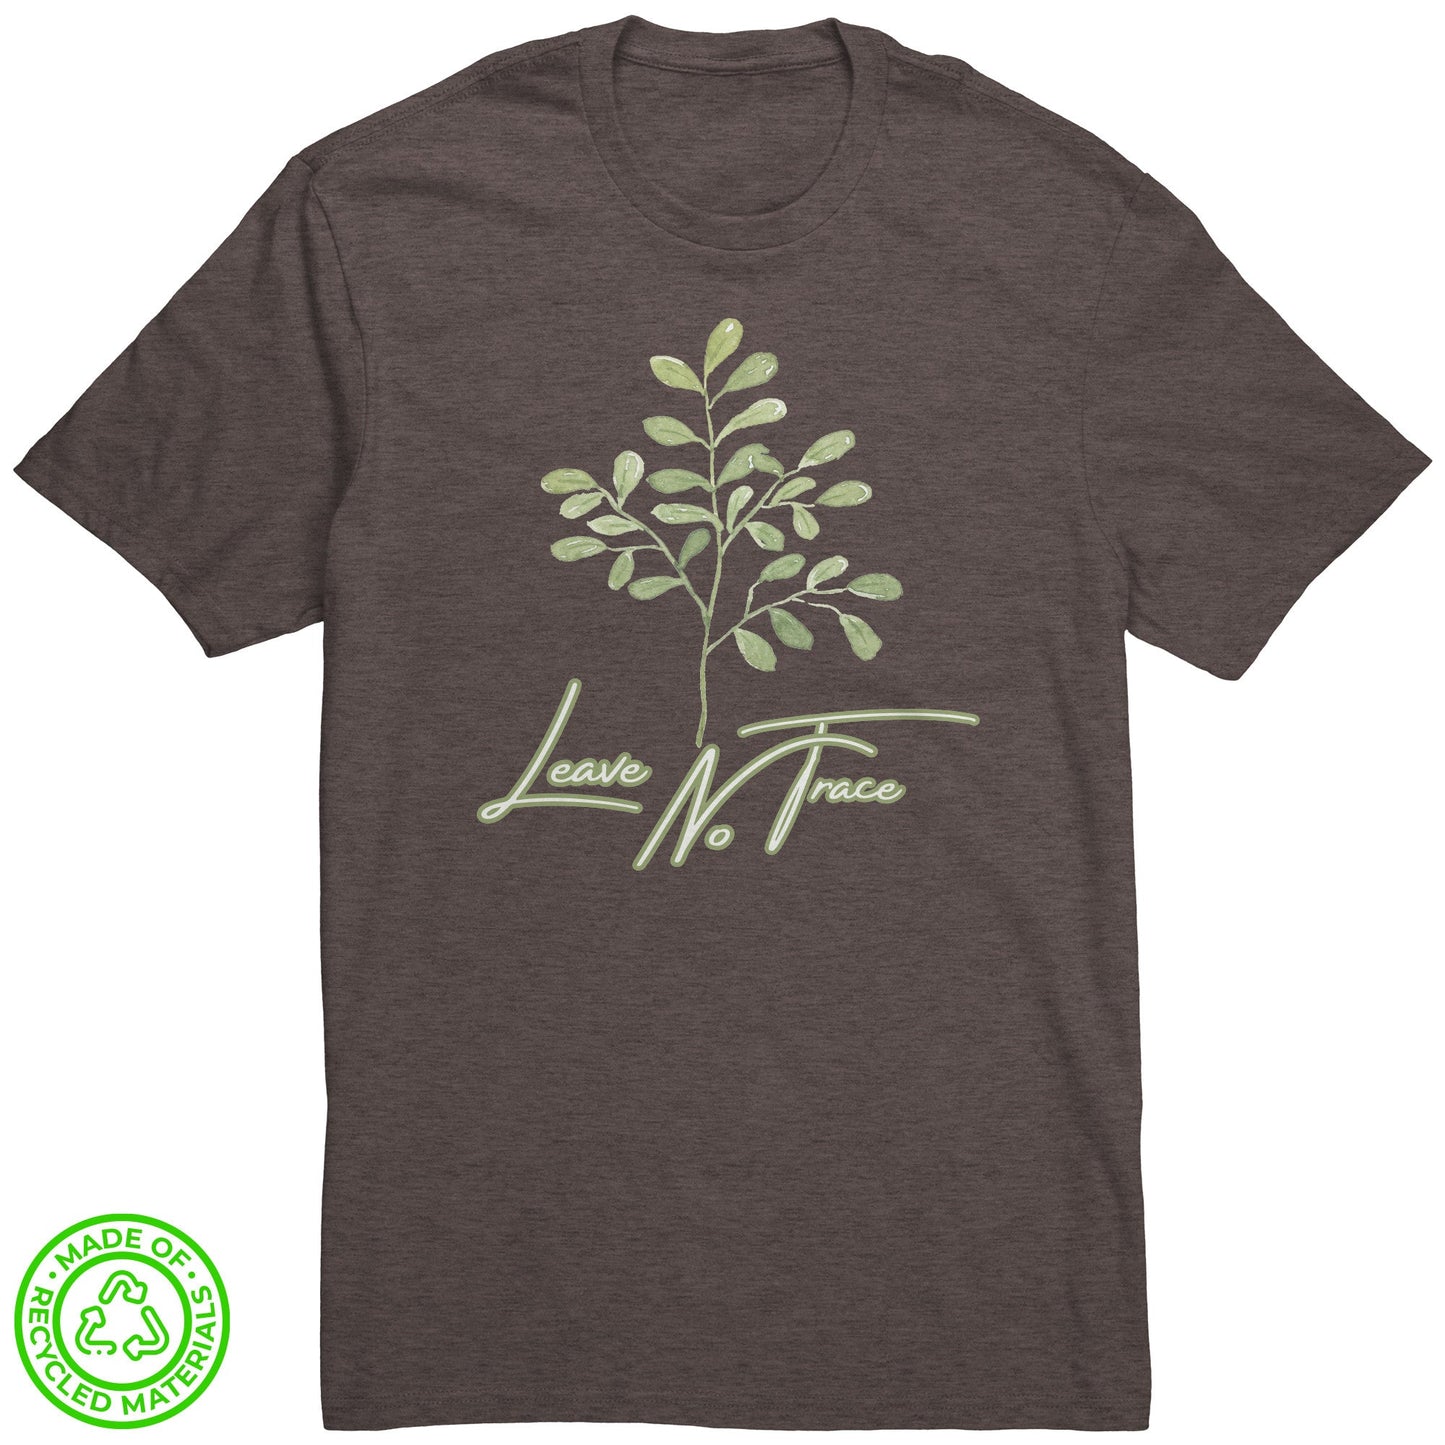 Eco-Friendly Re-Tee (Leave No Trace)